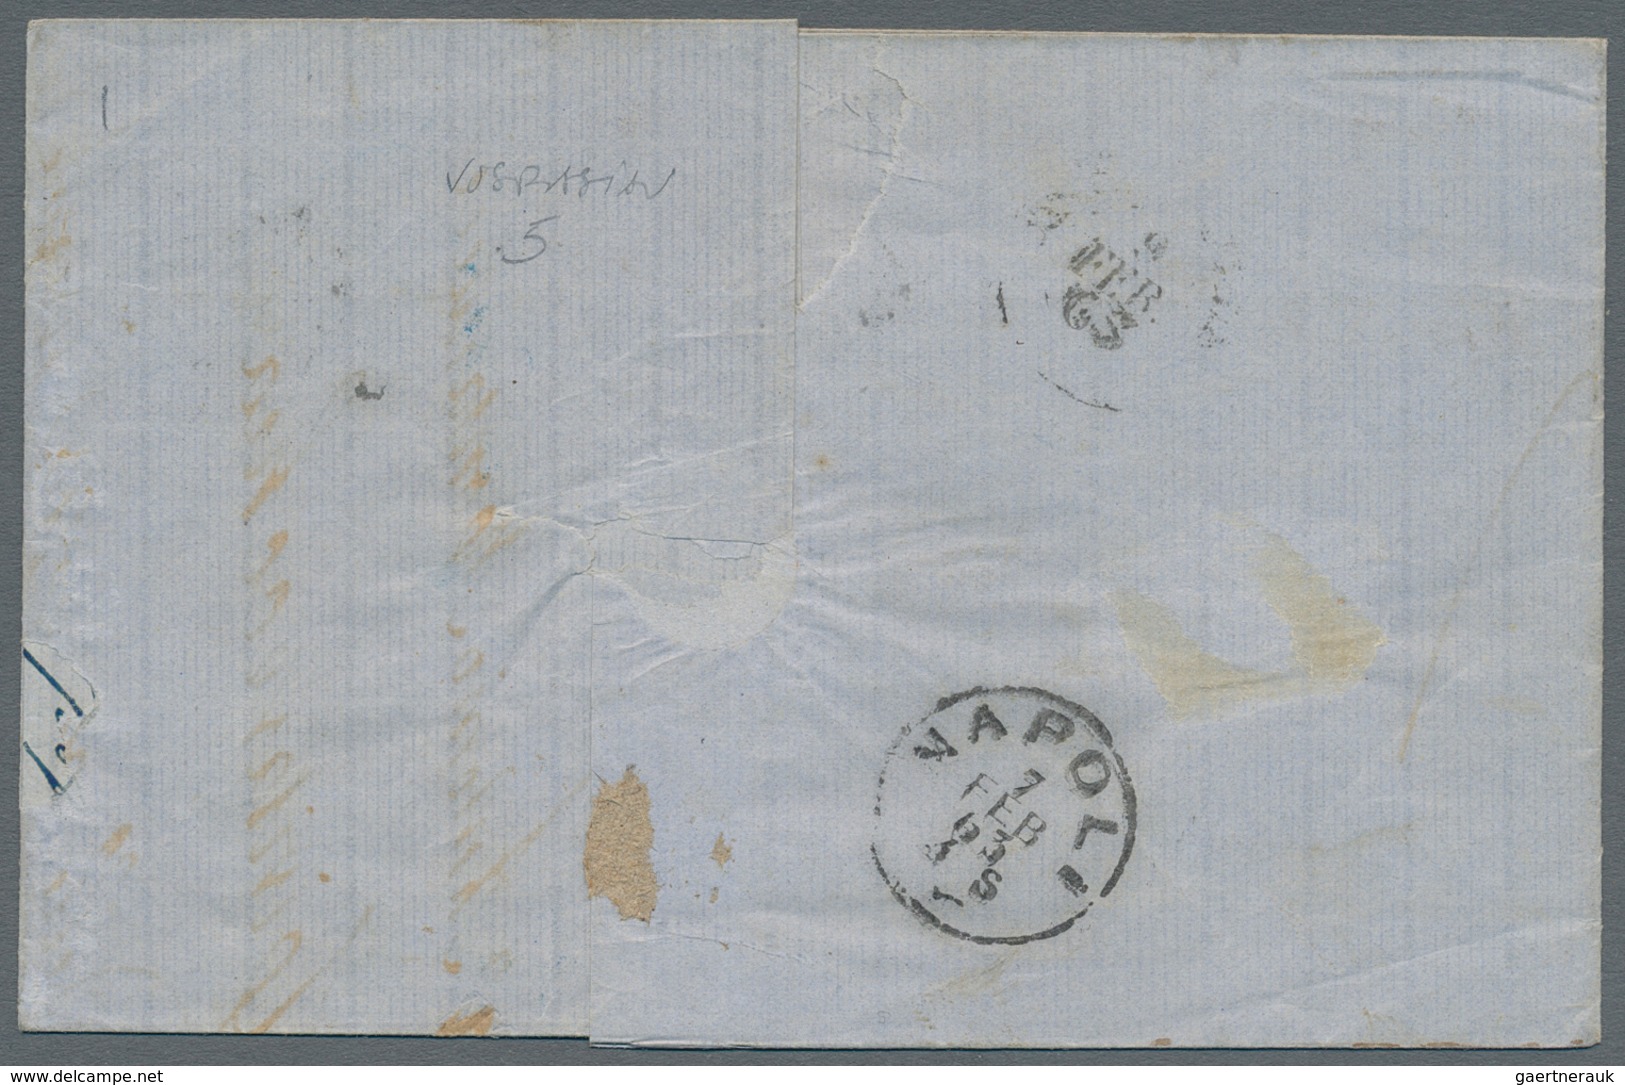 Italien: 1863, 14 C Blue ITALY Together With 5 C Green SARDINIA, Rare MIXED FRANKING, Tied By Double - Neufs